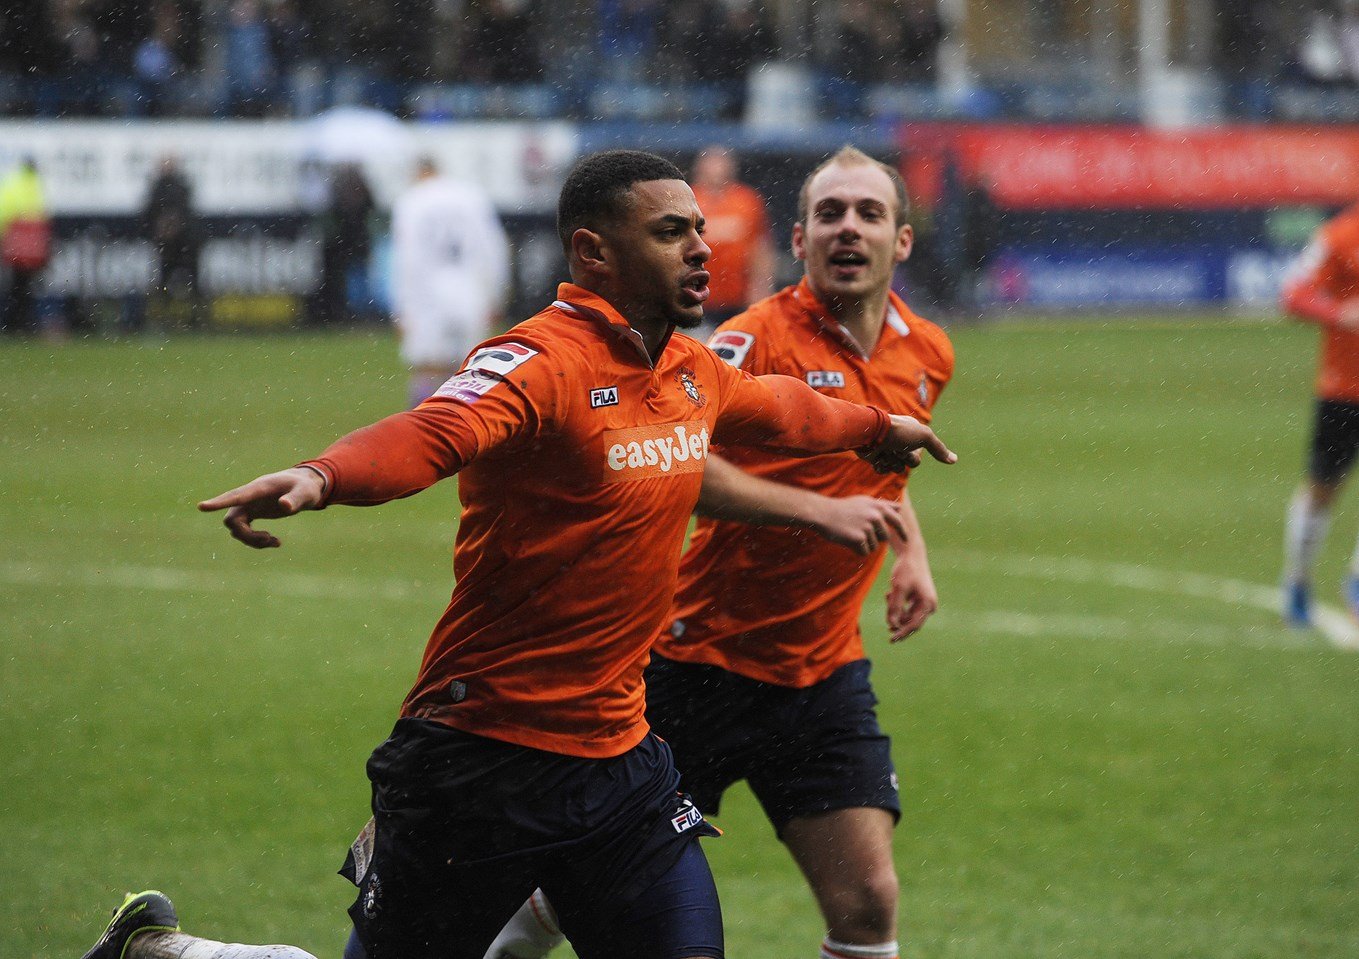 Andre Gray celebrating one of his goals with Jake Howells.